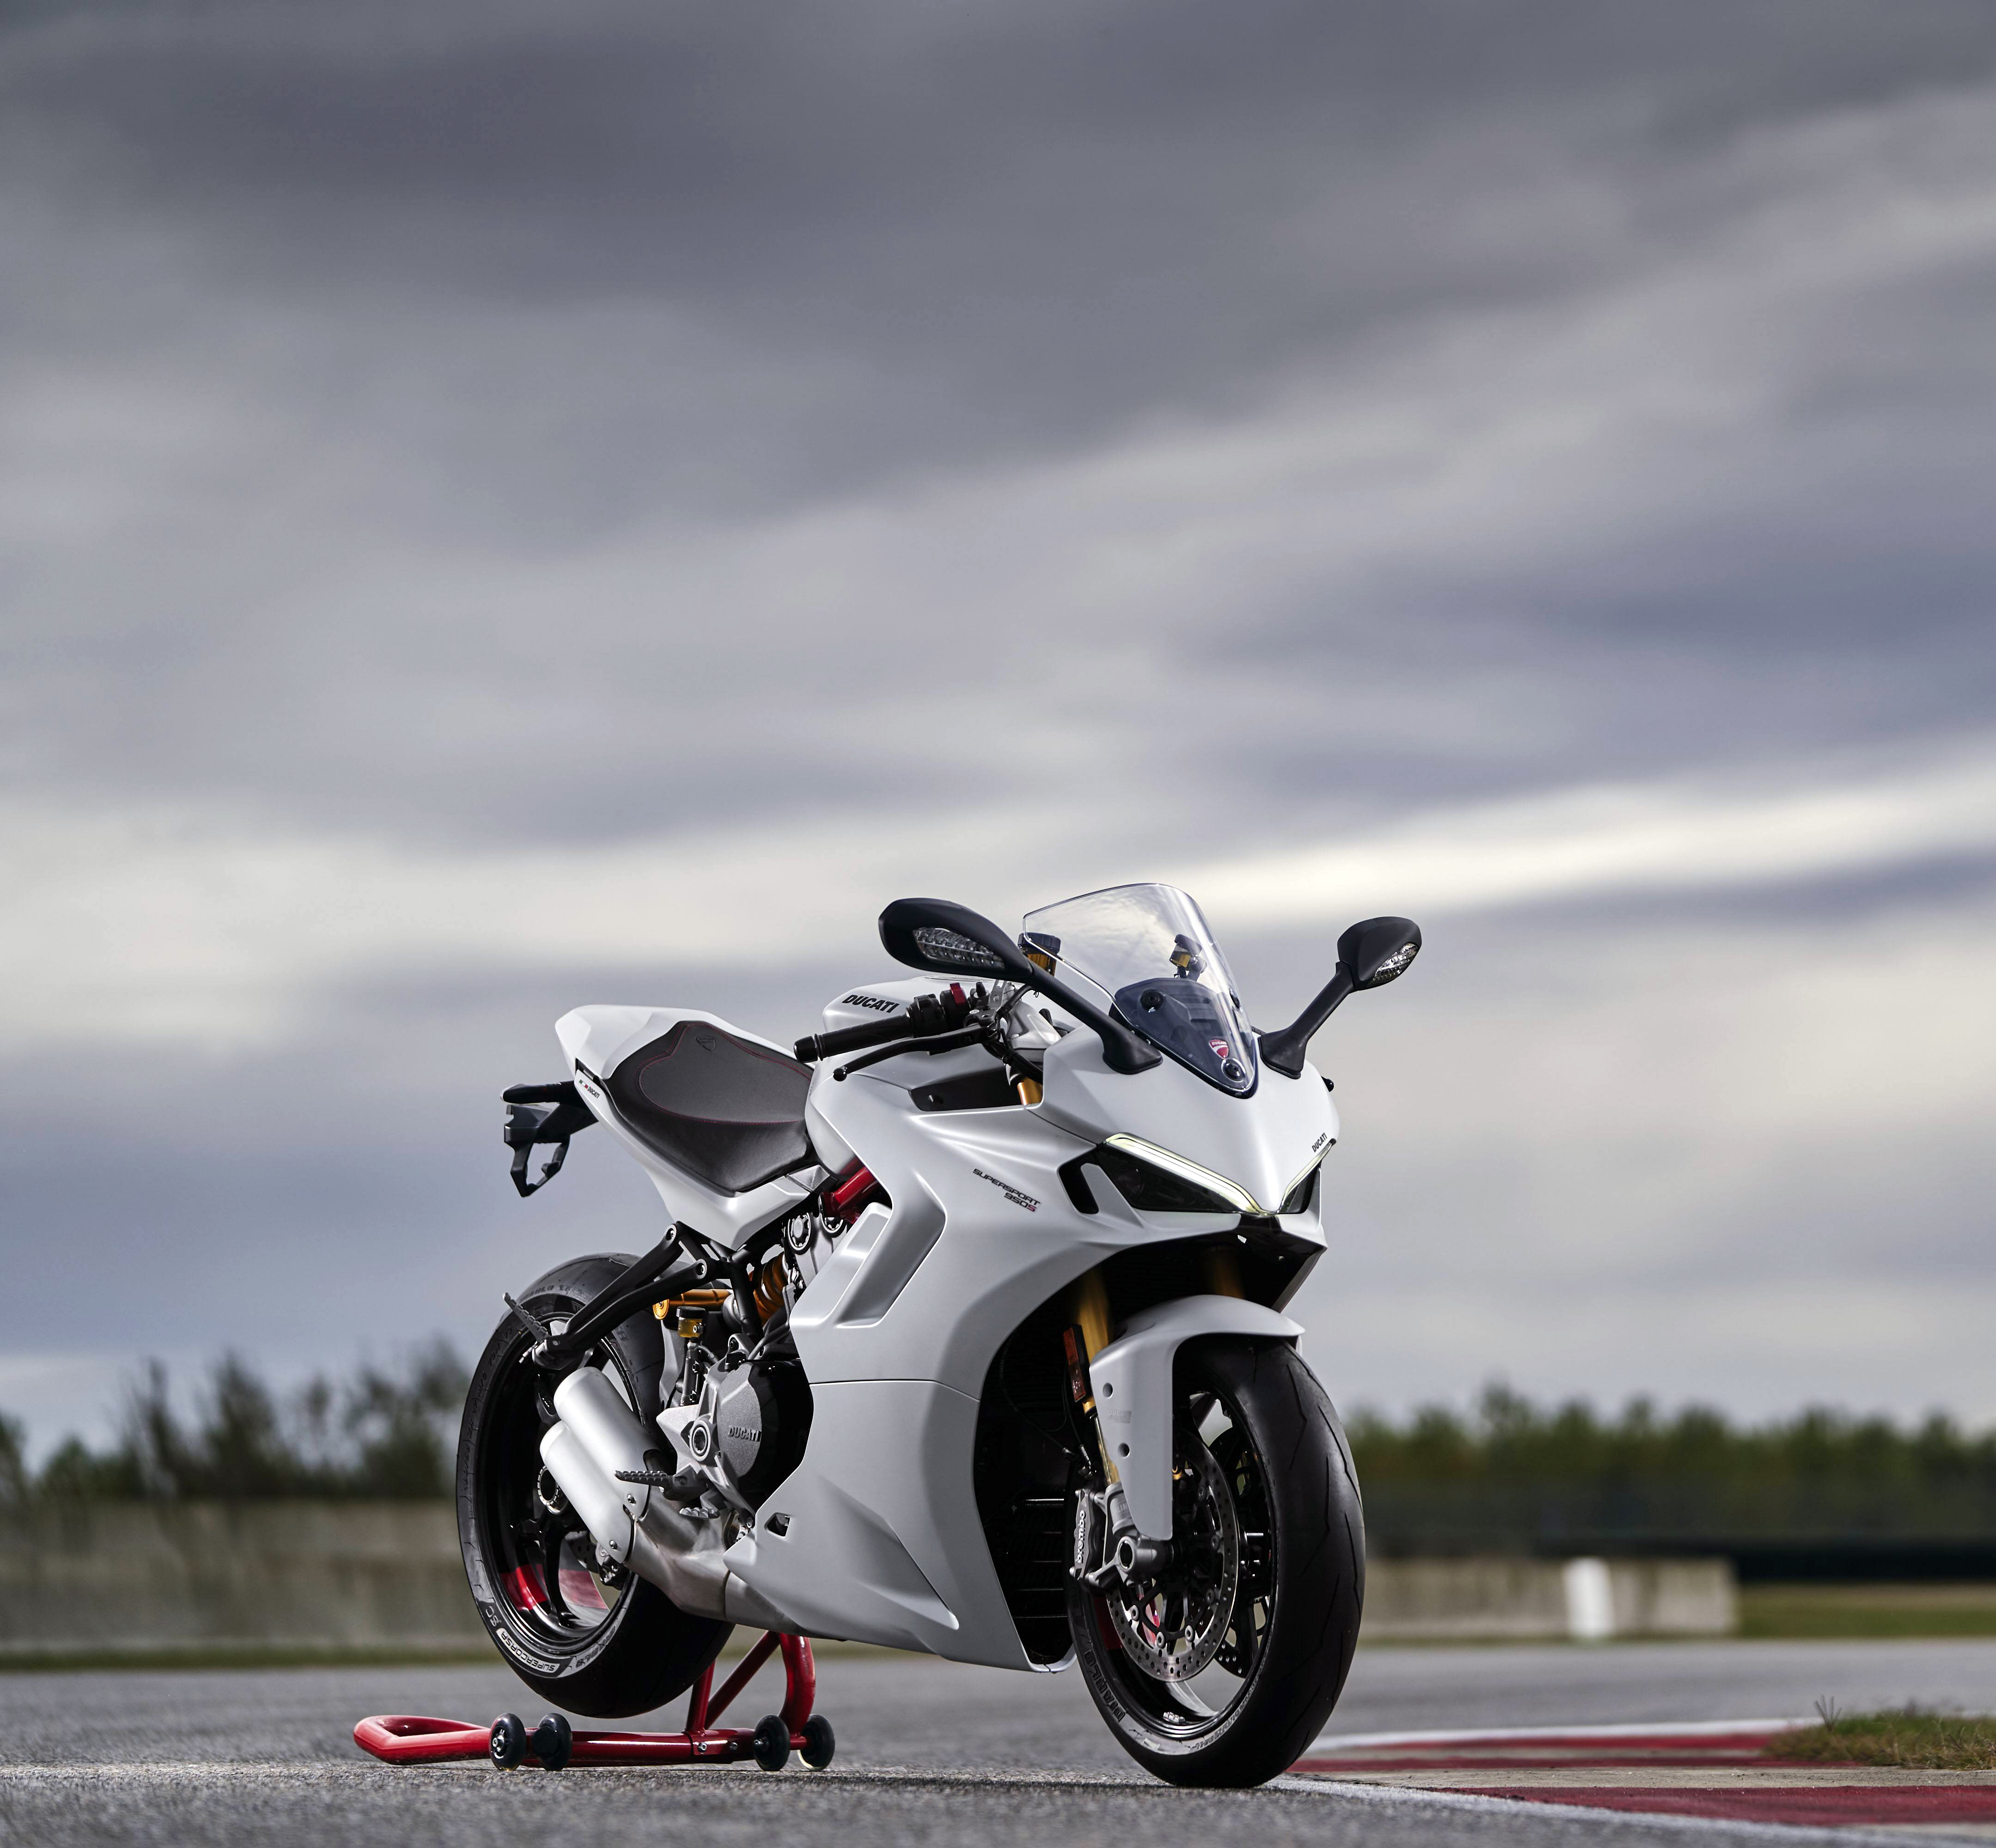 Wallpaper white, the sky, motorcycle, white, Supersport, bike, ducati,  Ducati, supersport, 1198 images for desktop, section мотоциклы - download